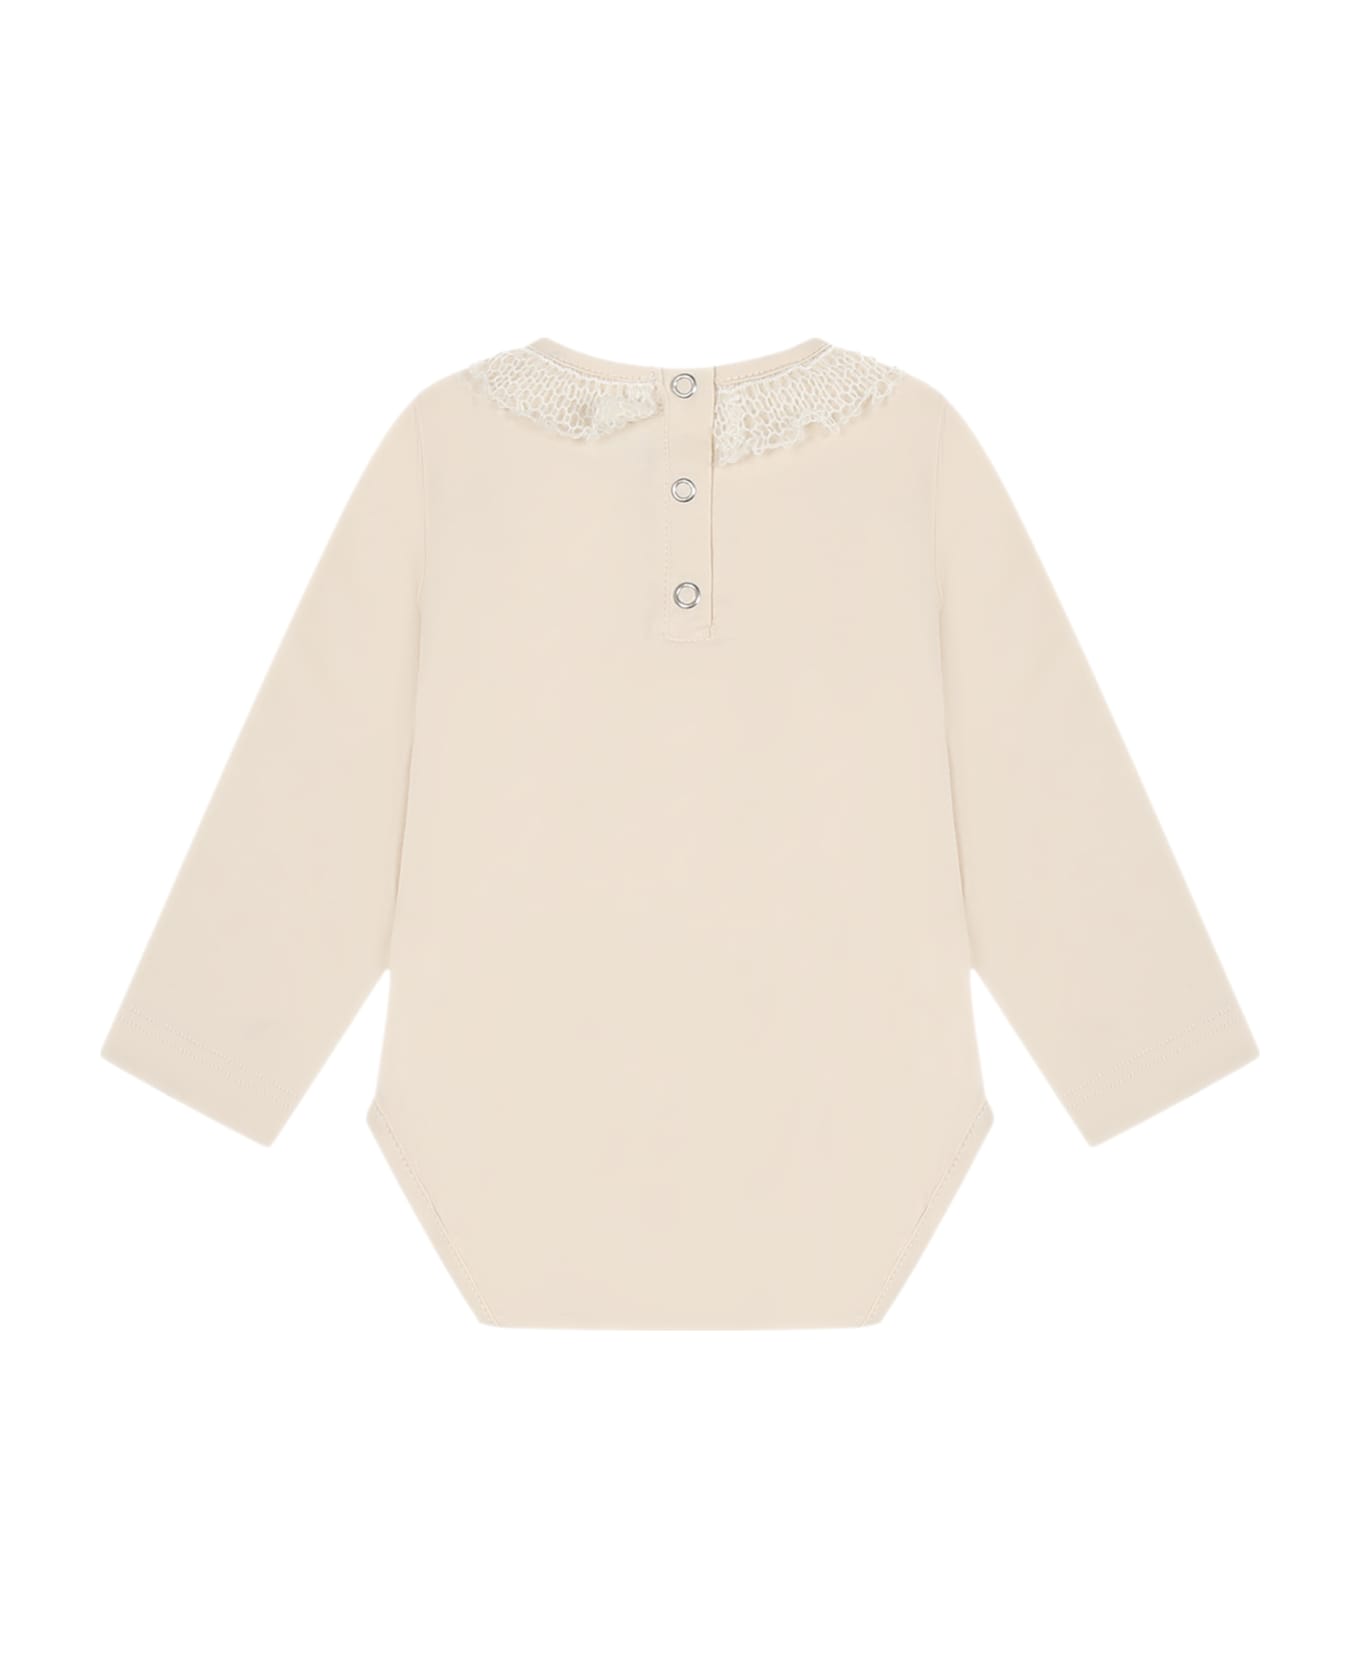 Caffe' d'Orzo Ivory Body For Baby Girl With Ruffles - cream colour ボディスーツ＆セットアップ